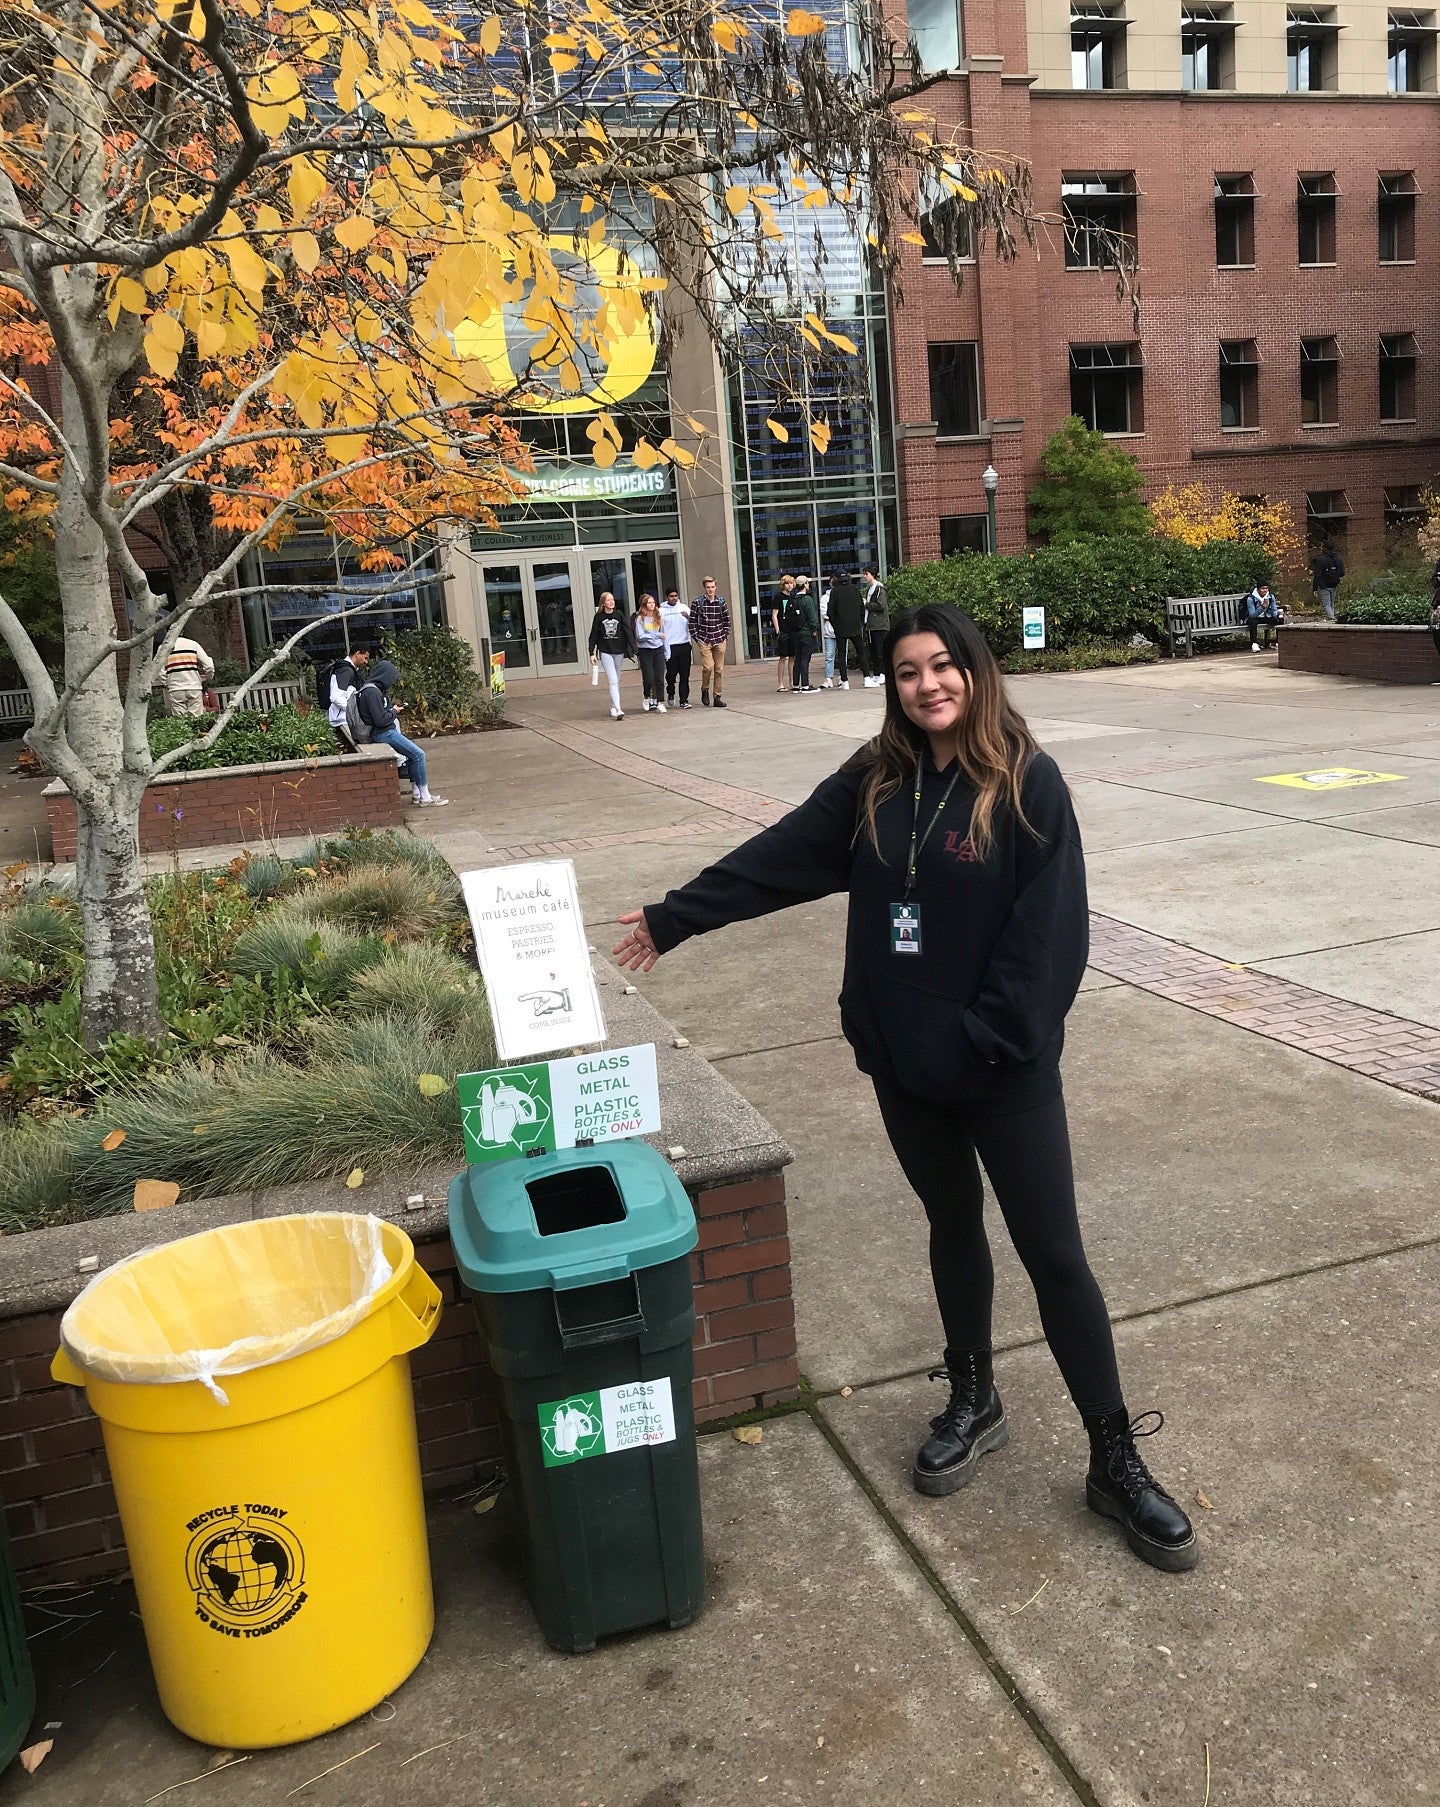 Student sustainability showing how to properly sort waste on campus.